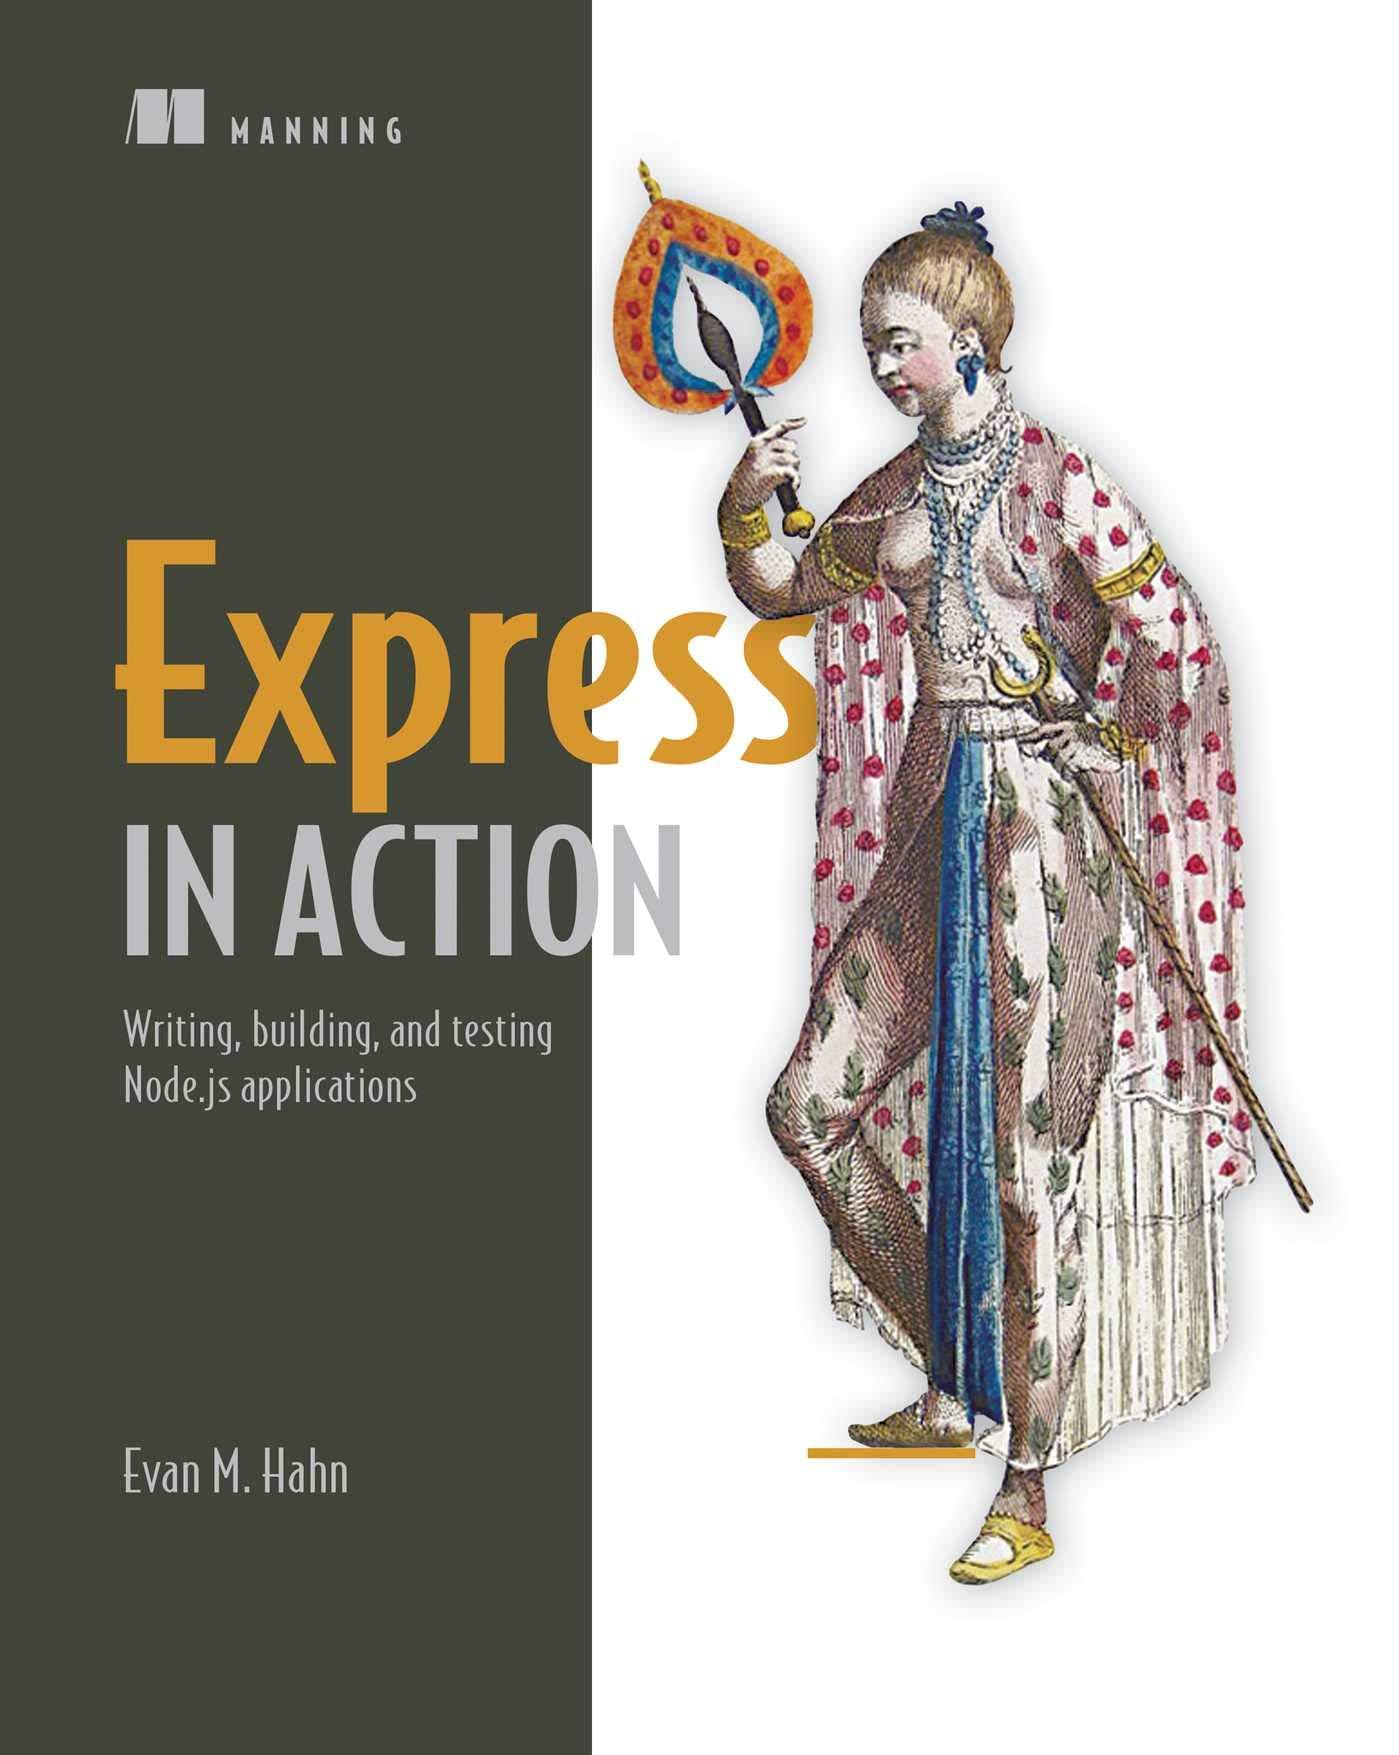 Express in Action——封面图片